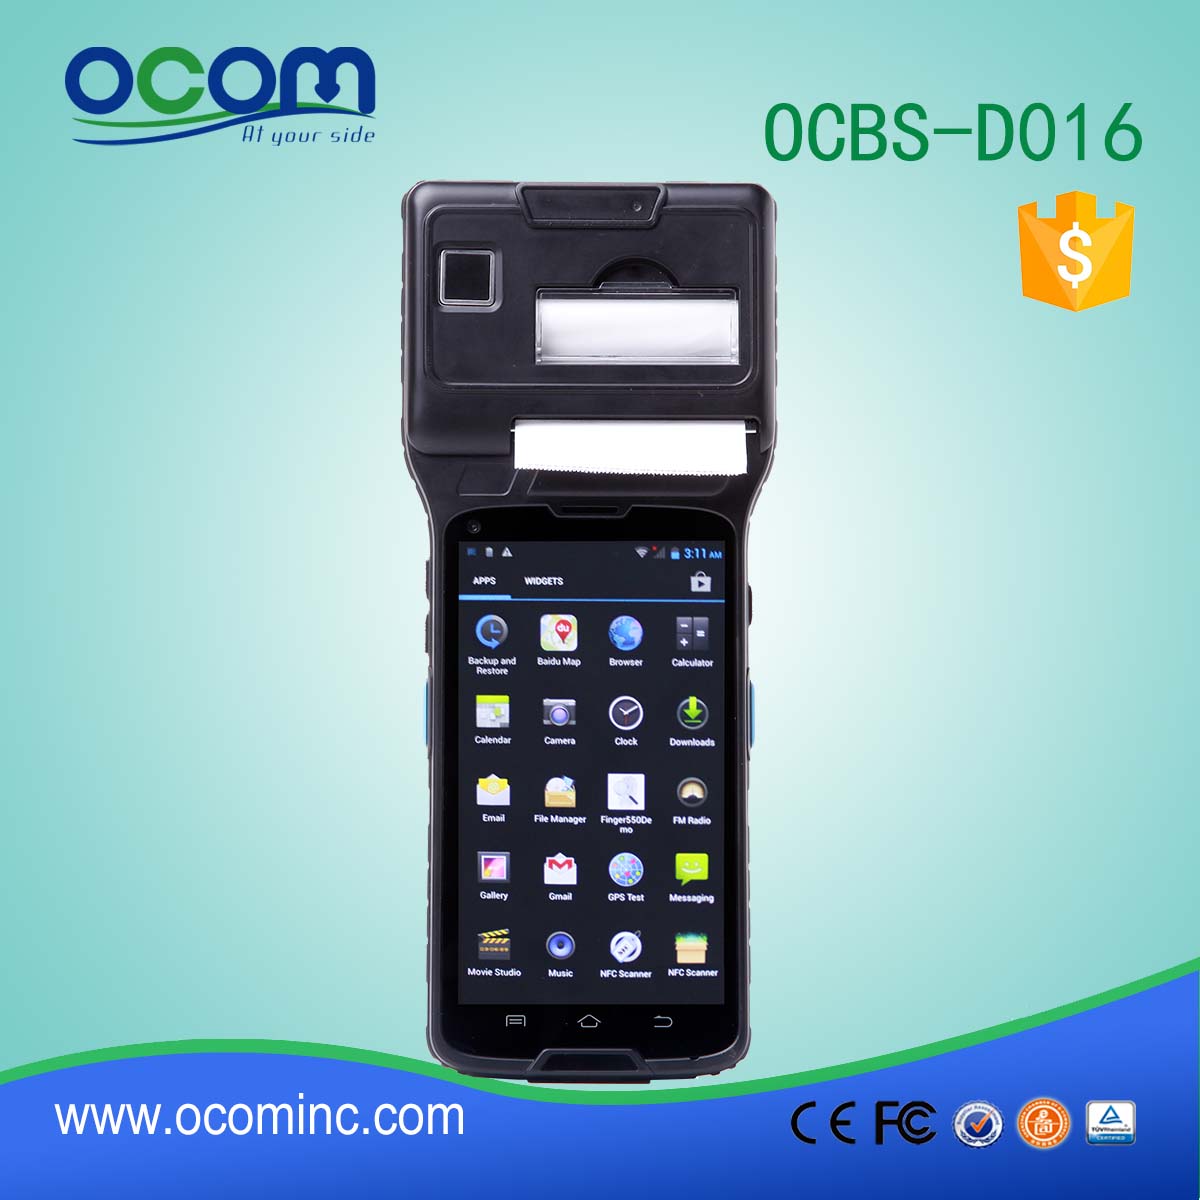 OCBS-D016 Portable Android inventory pda Courier pda With Built-in Printer